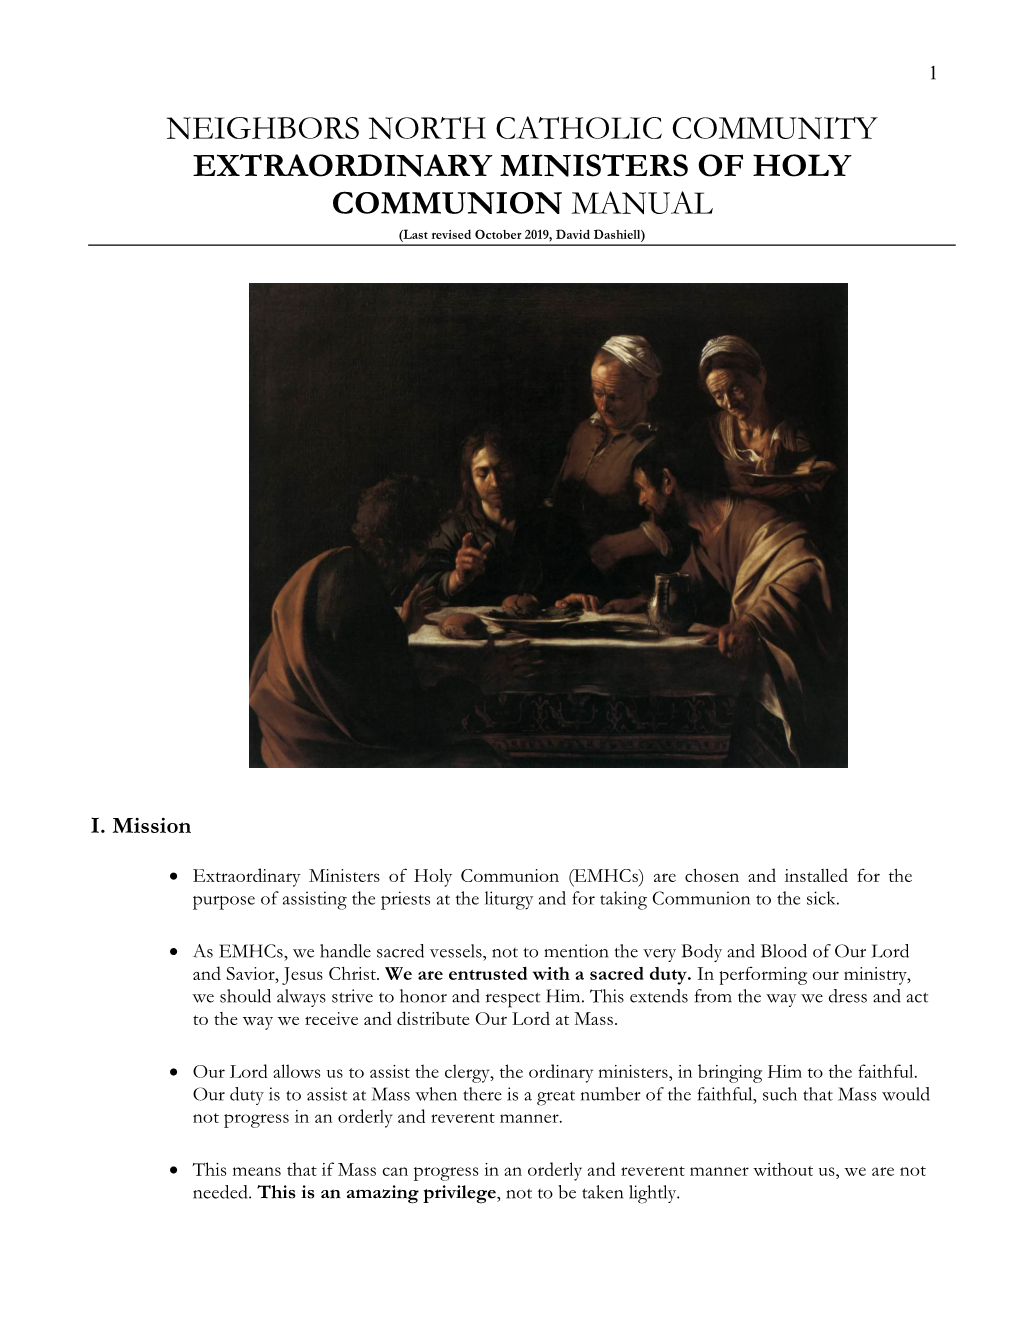 EXTRAORDINARY MINISTERS of HOLY COMMUNION MANUAL (Last Revised October 2019, David Dashiell)